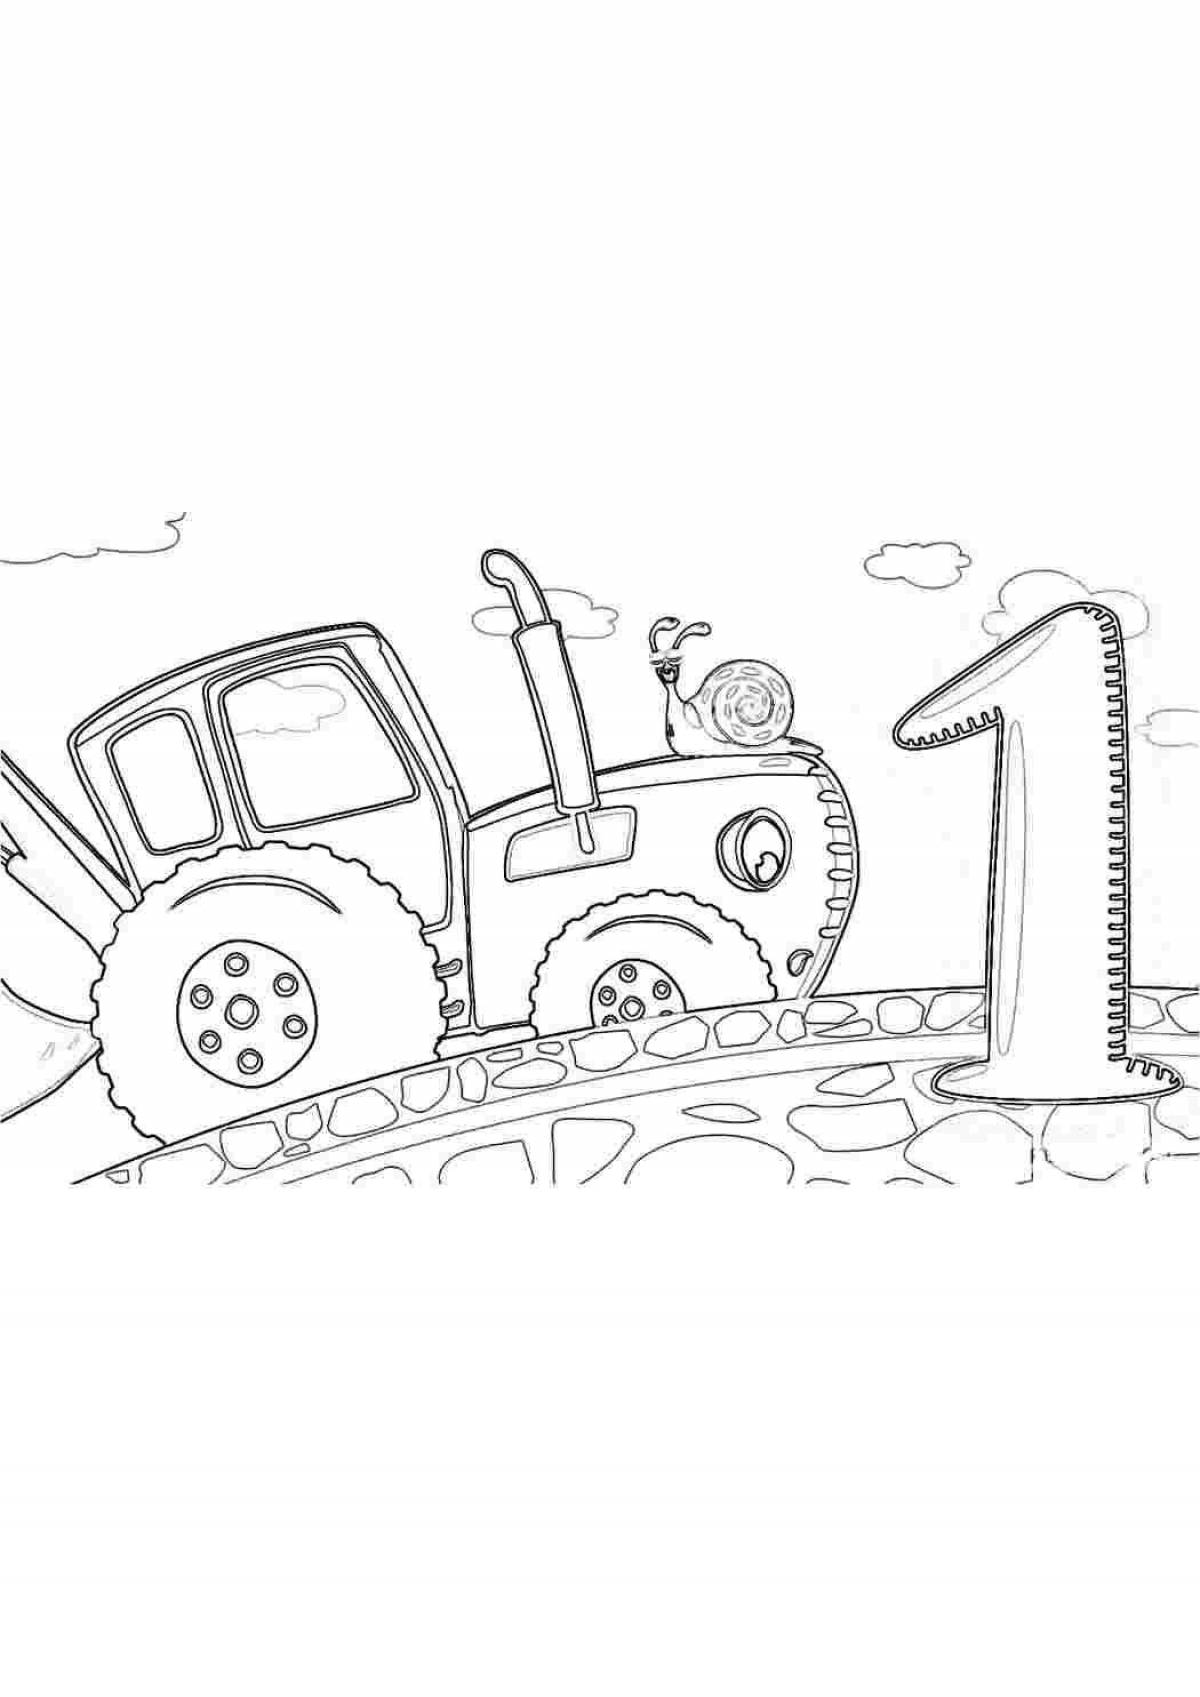 Fabulous Blue Tractor Coloring Page for Toddlers